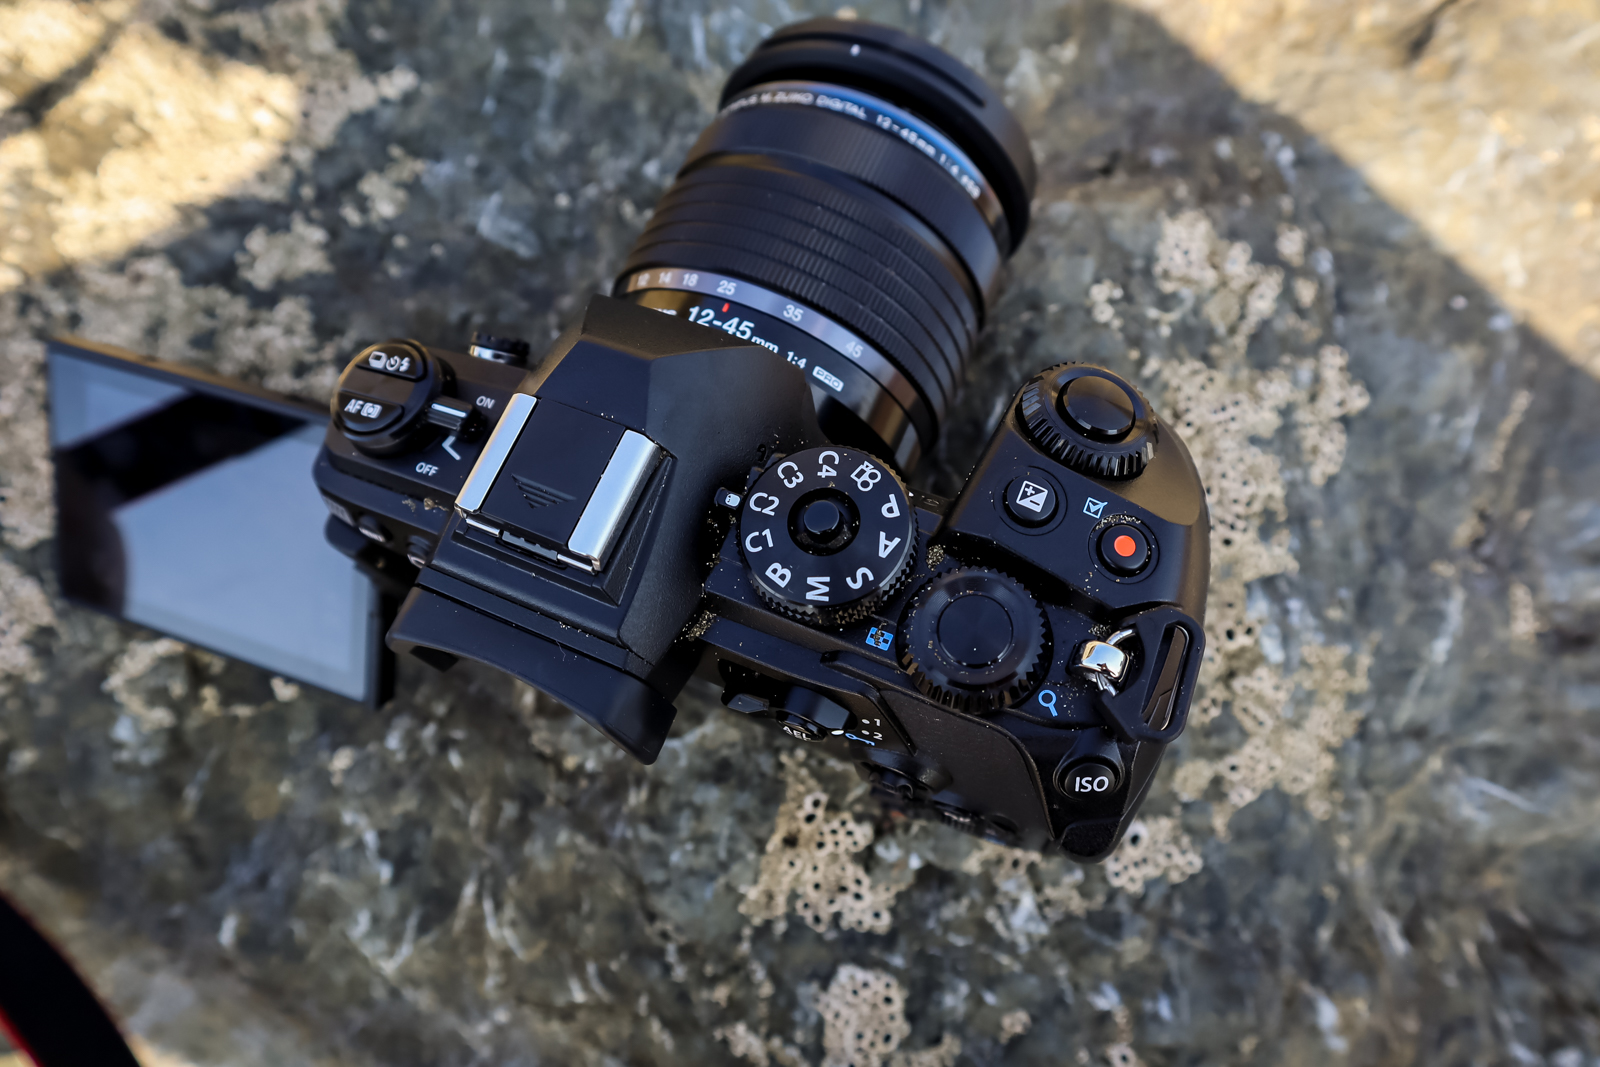 Olympus OM-D E-M1 Mark III Vs. OM-D E-M1 Mark II: Worth the 